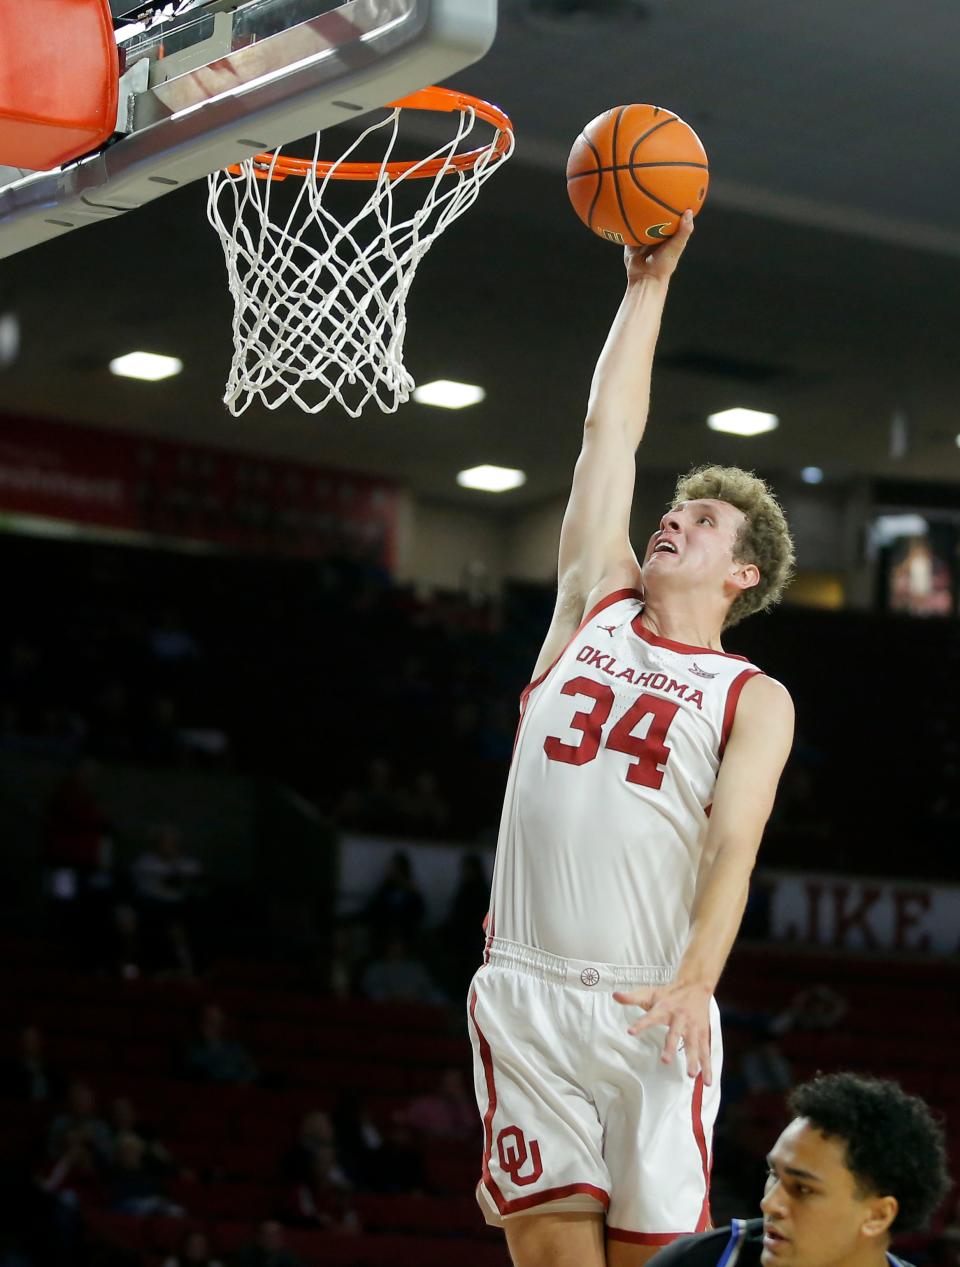 Oklahoma's Jacob Groves (34) dunks the ball during a college basketball exhibition game between the University of Oklahoma Sooners (OU) and the Oklahoma City University Starts (OCU) at Loyd Noble Center in Norman, Okla., Tuesday, Oct. 25, 2022. 